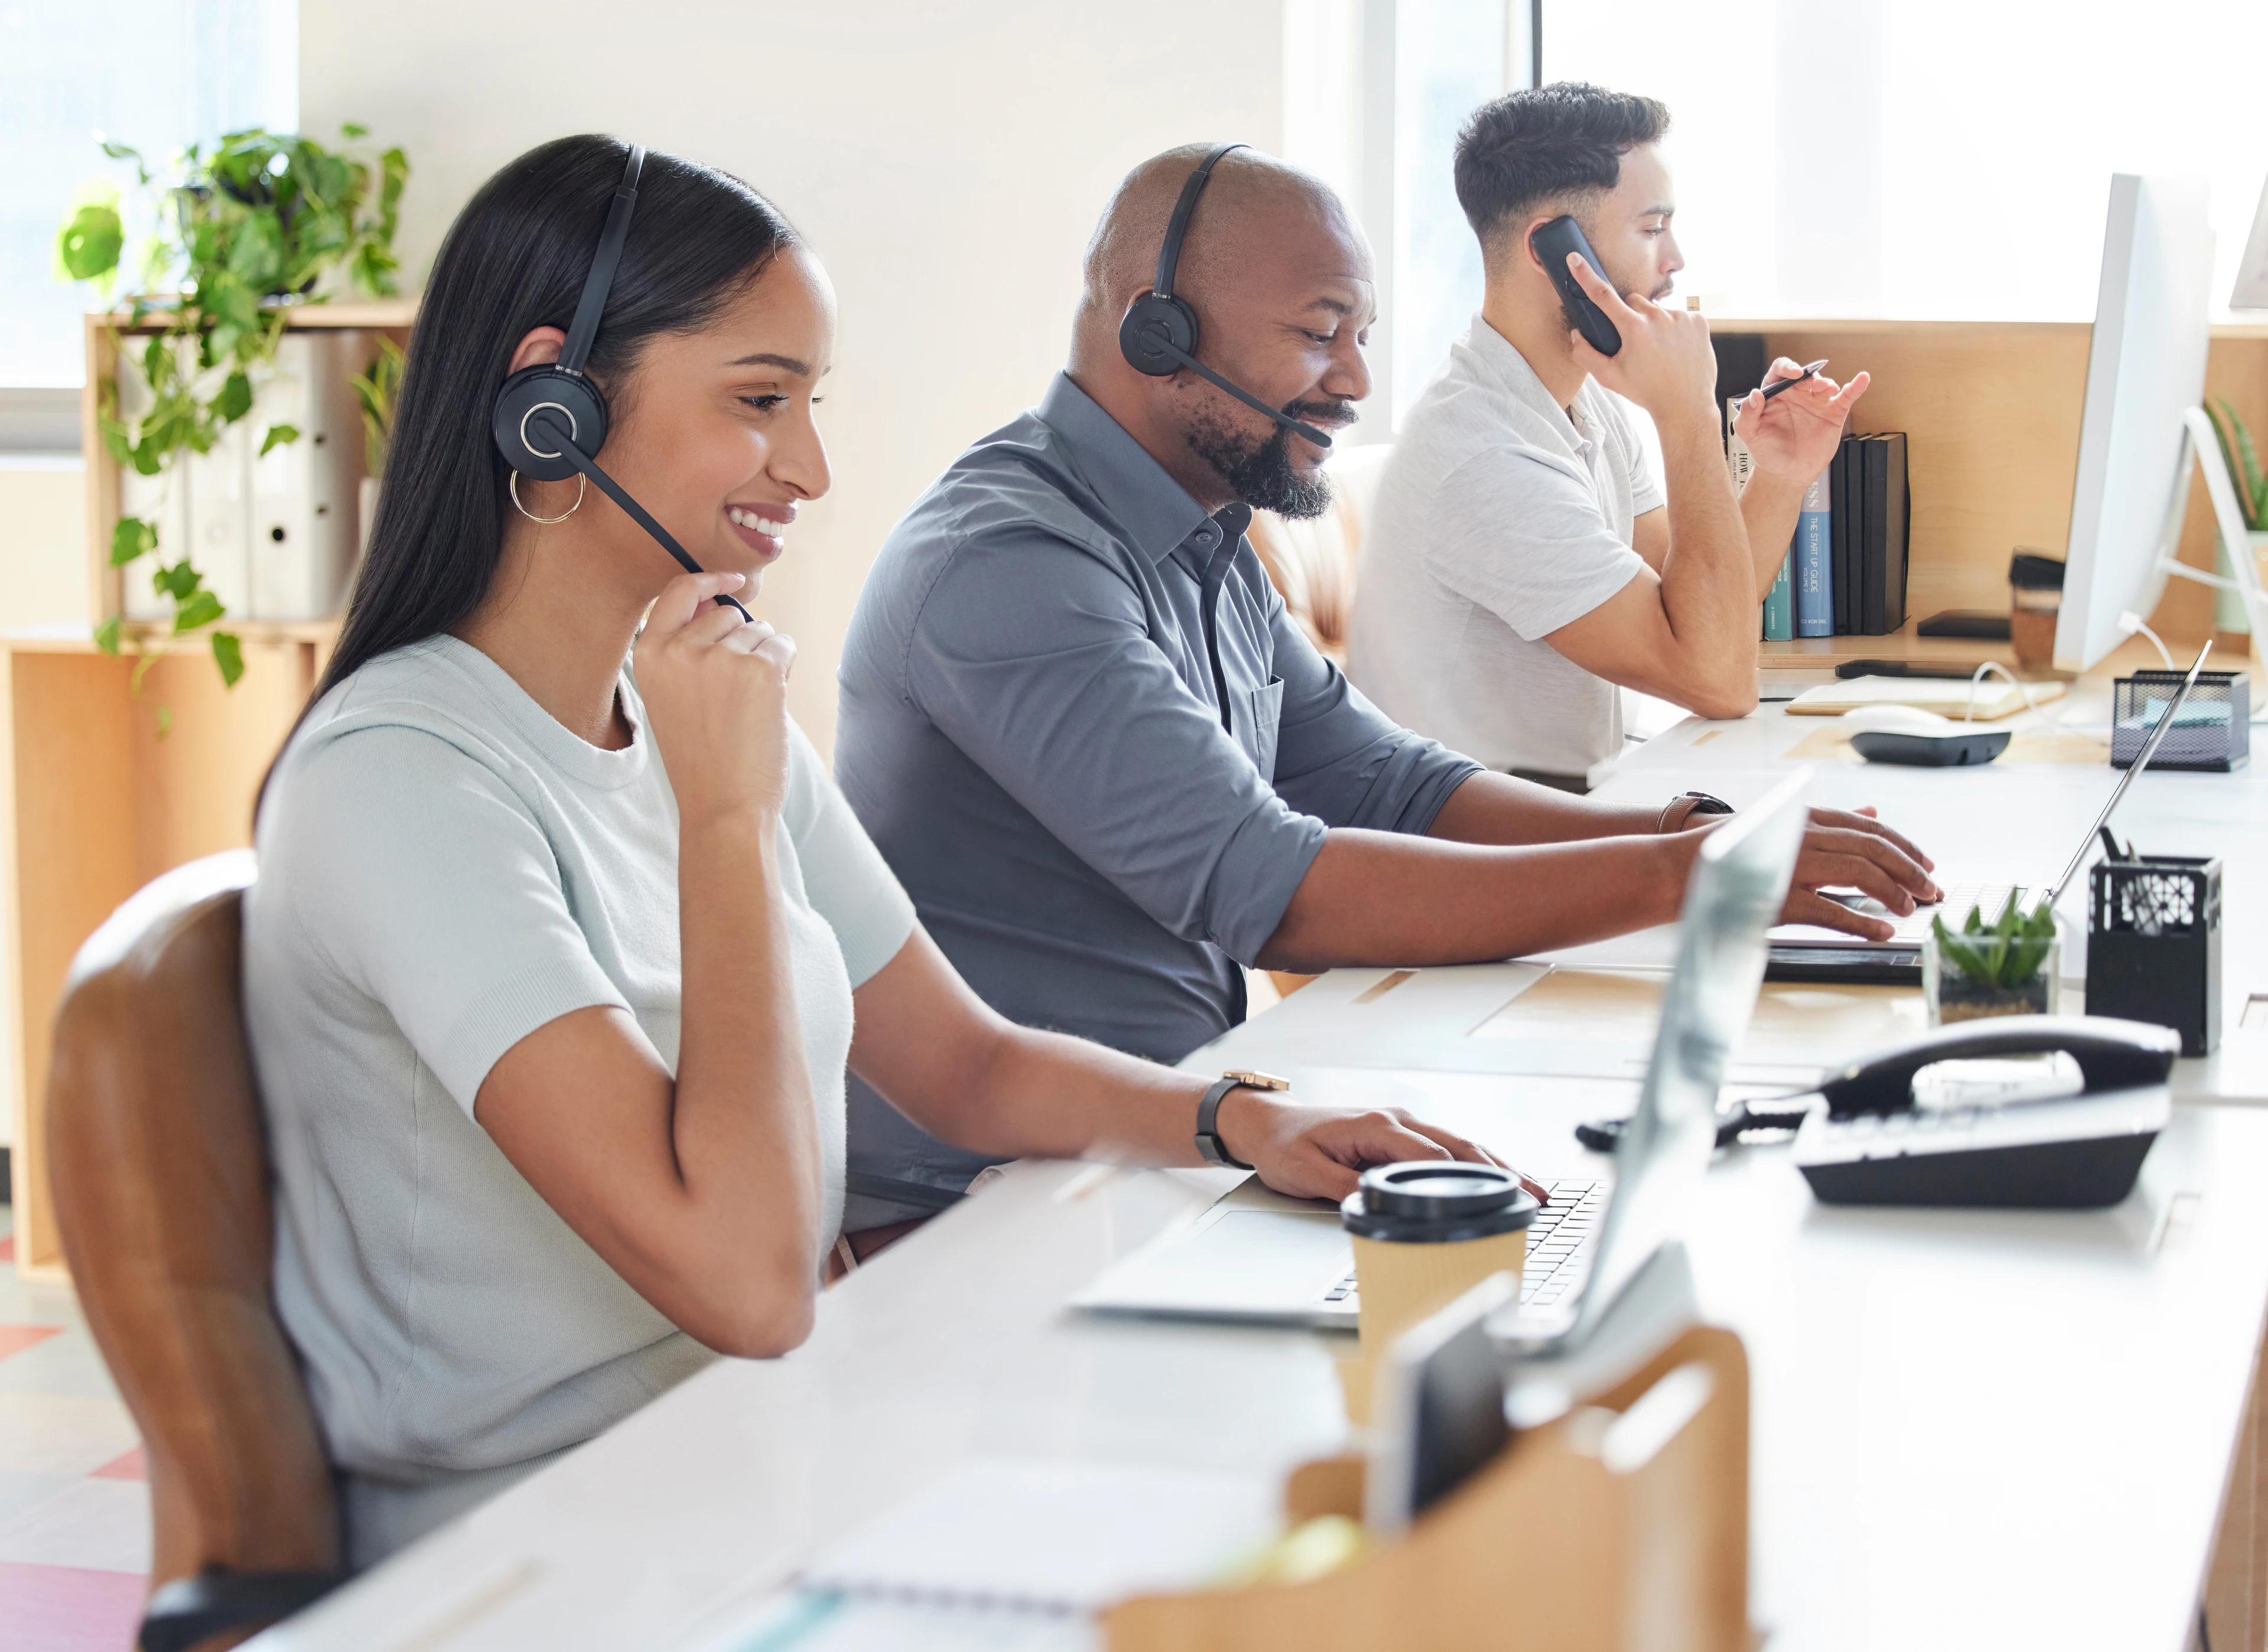 3 call centre workers giving dedicated customer support